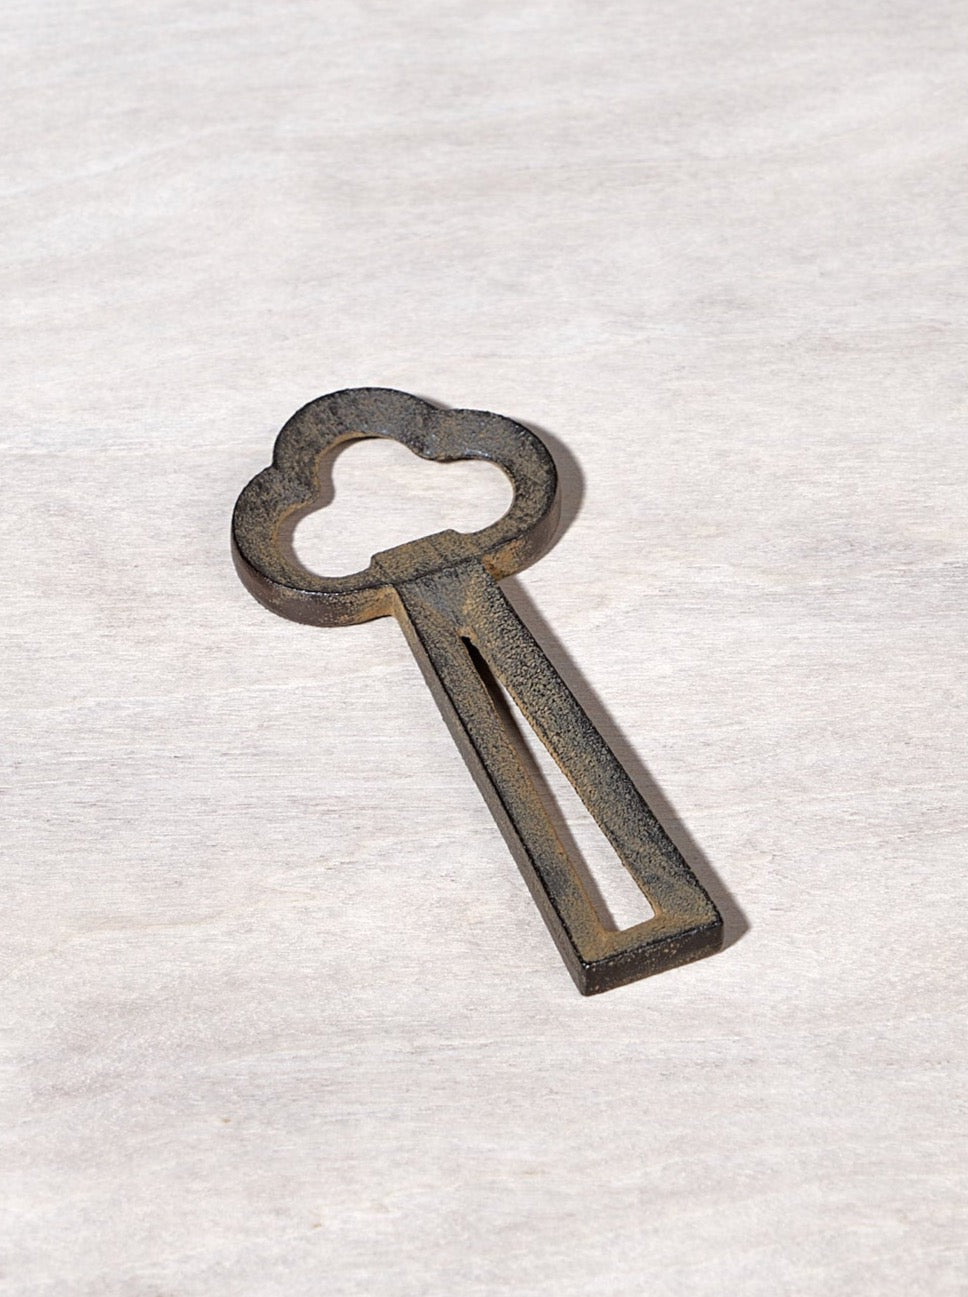 A Clover Bottle Opener – Rusty Brown with a Chushin Kobo shape on it.